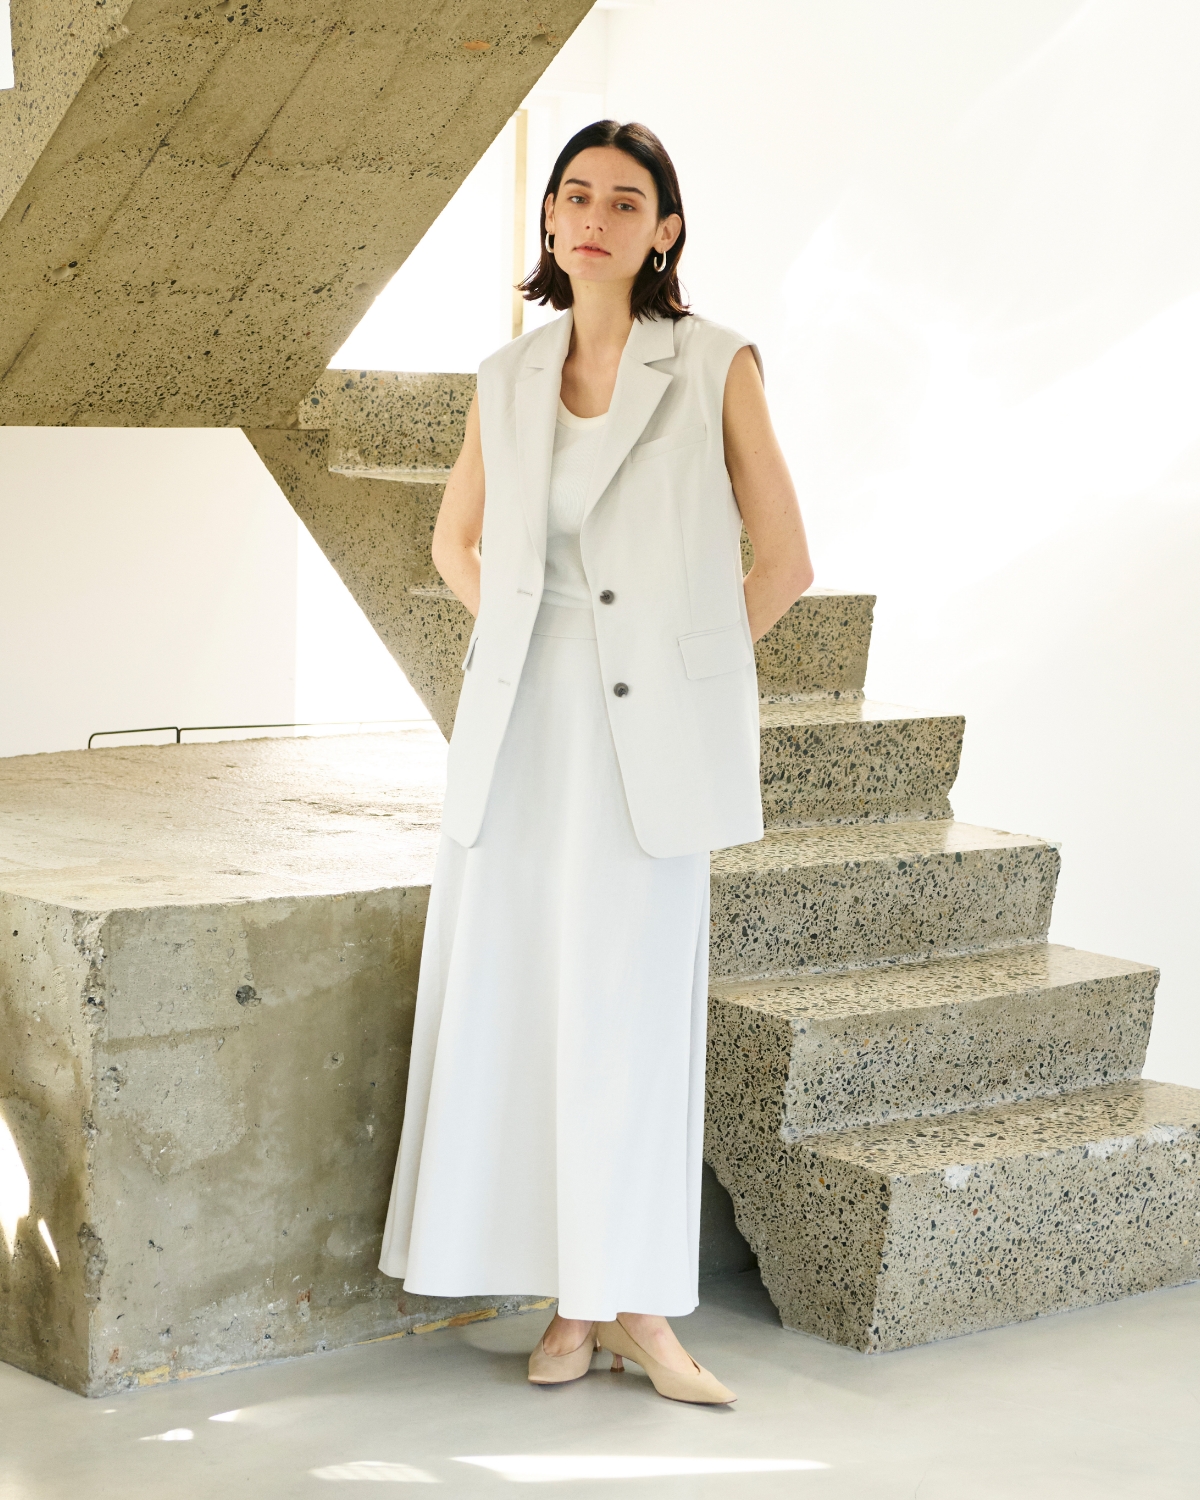 Not Just Comfort Linen for the City LINEN OX Collectionを着用している女性モデル08